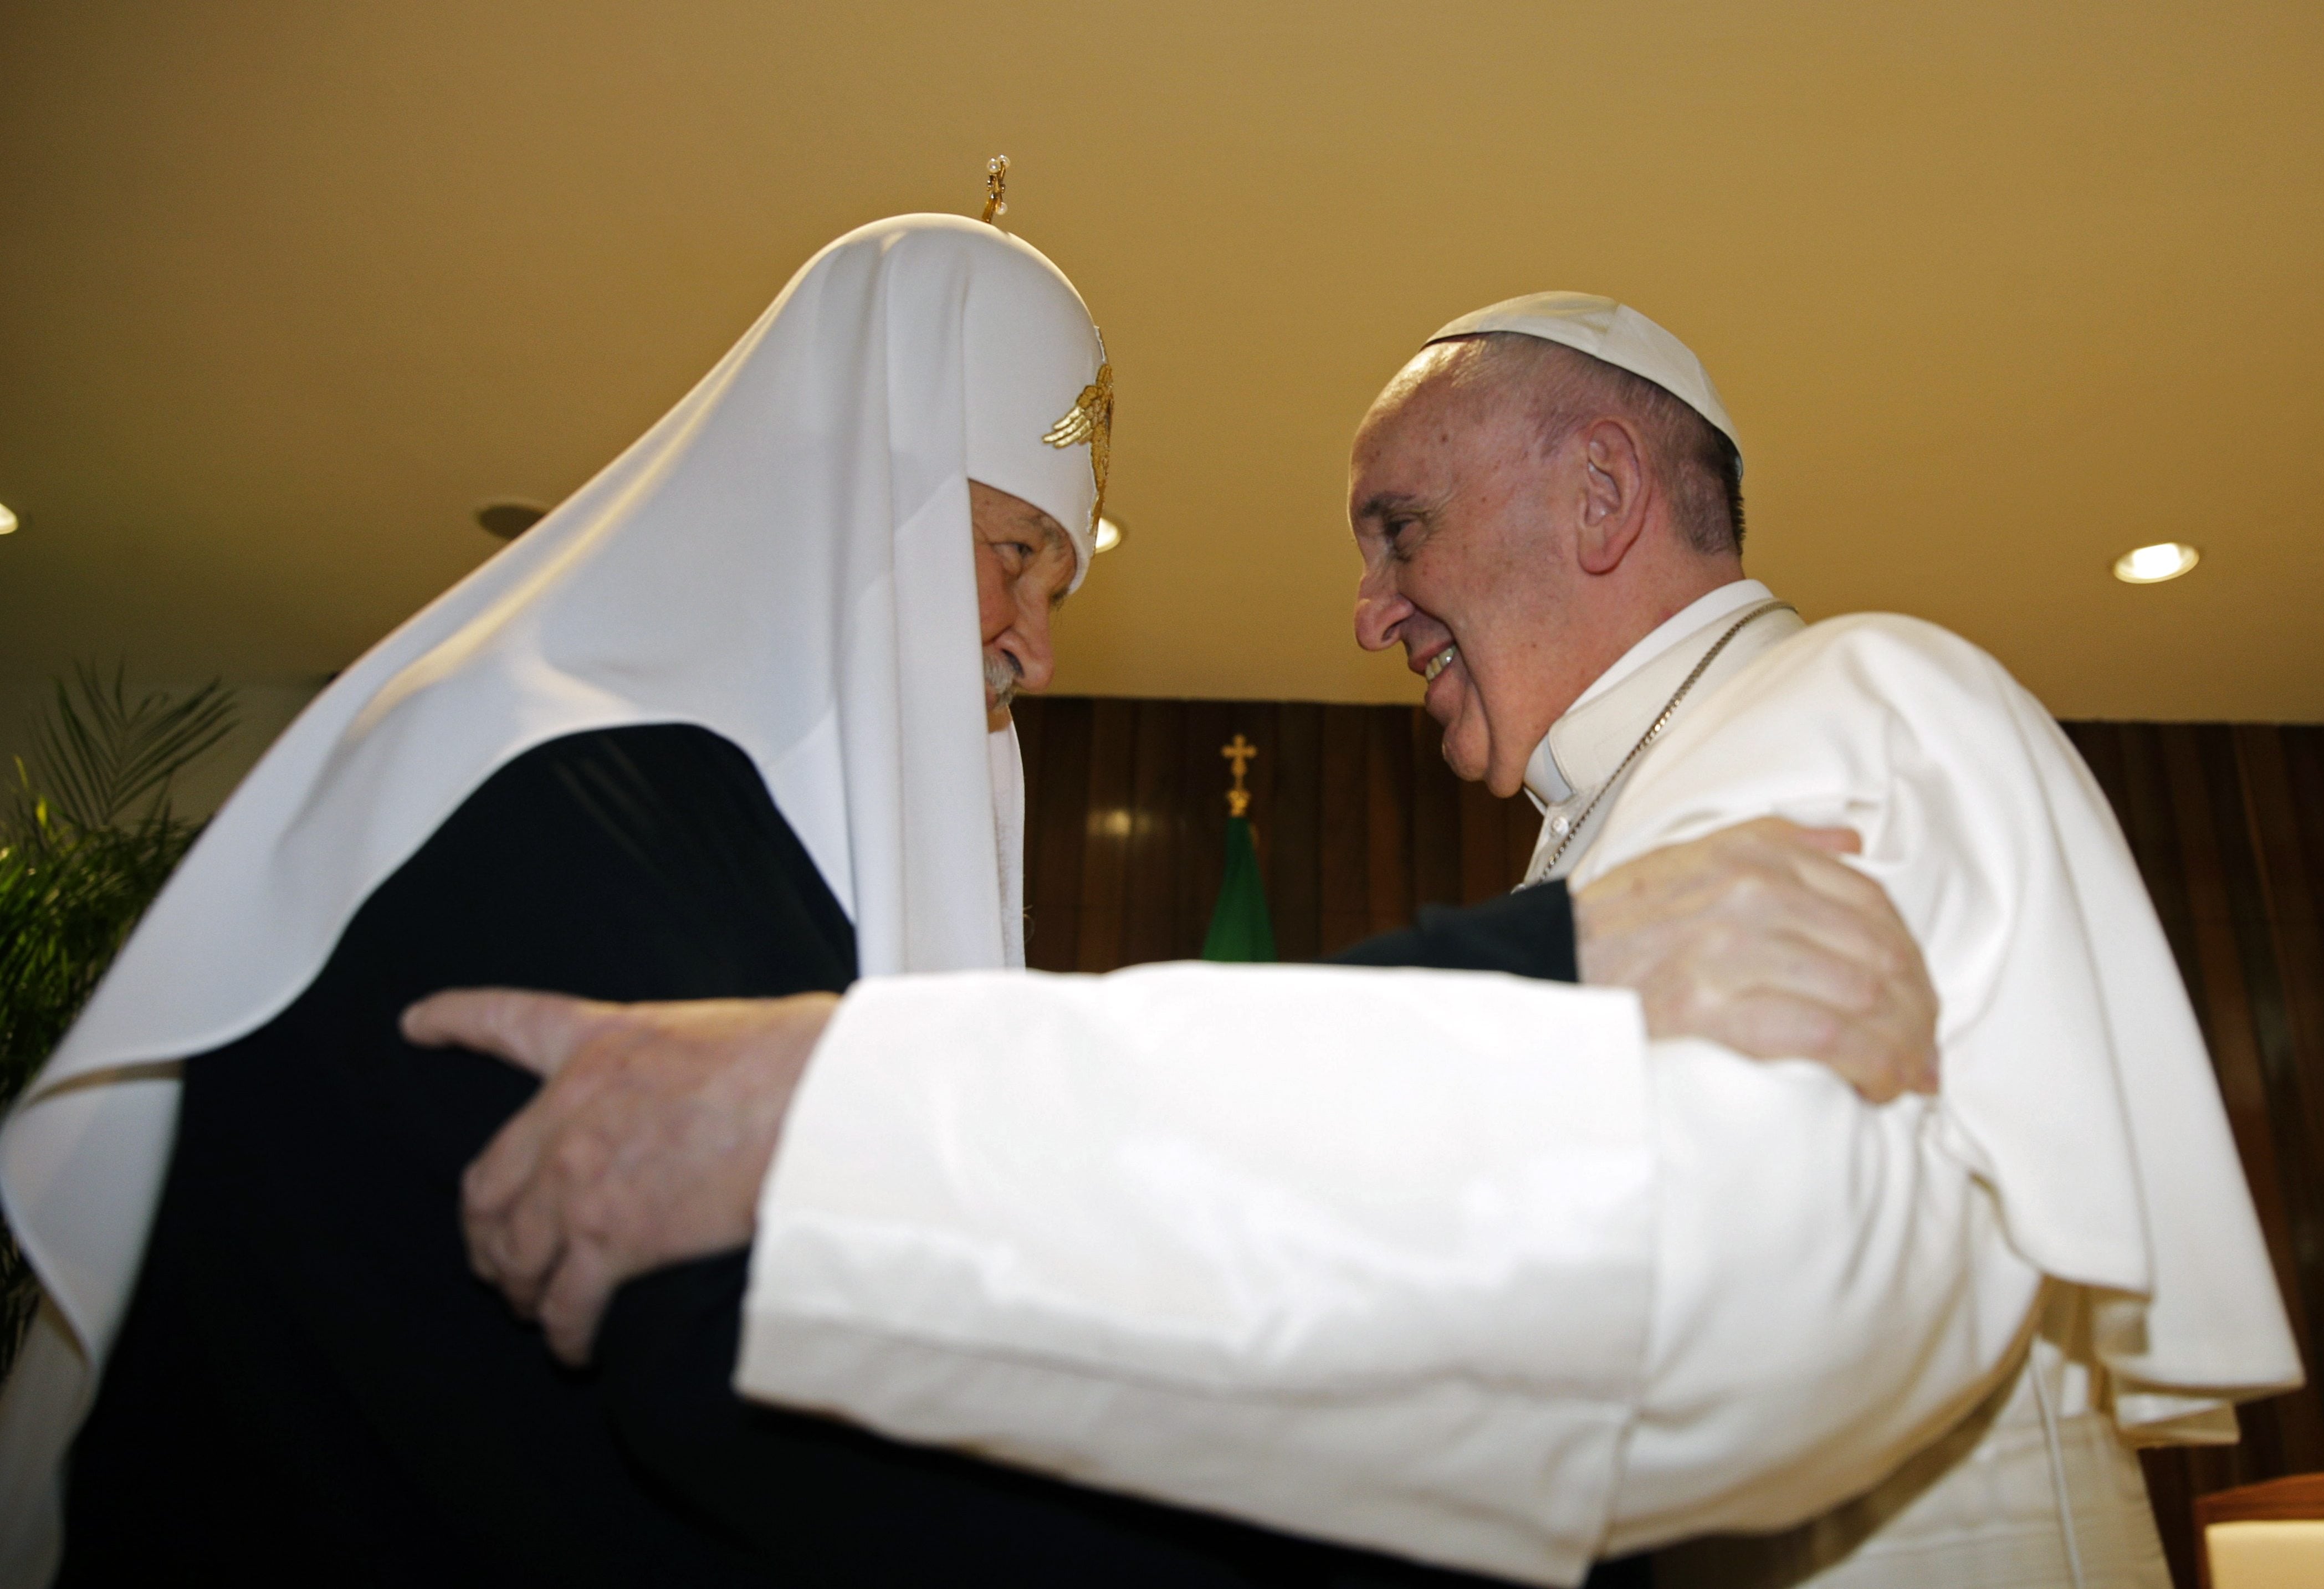 The head of the Russian Orthodox Church Patriarch Kirill, left,  and Pope Francis meet at the Jose Marti airport in Havana, Cuba, Friday. This is the first-ever papal meeting with the head of the Russian Orthodox Church, a historic development in the 1,000-year schism within Christianity.